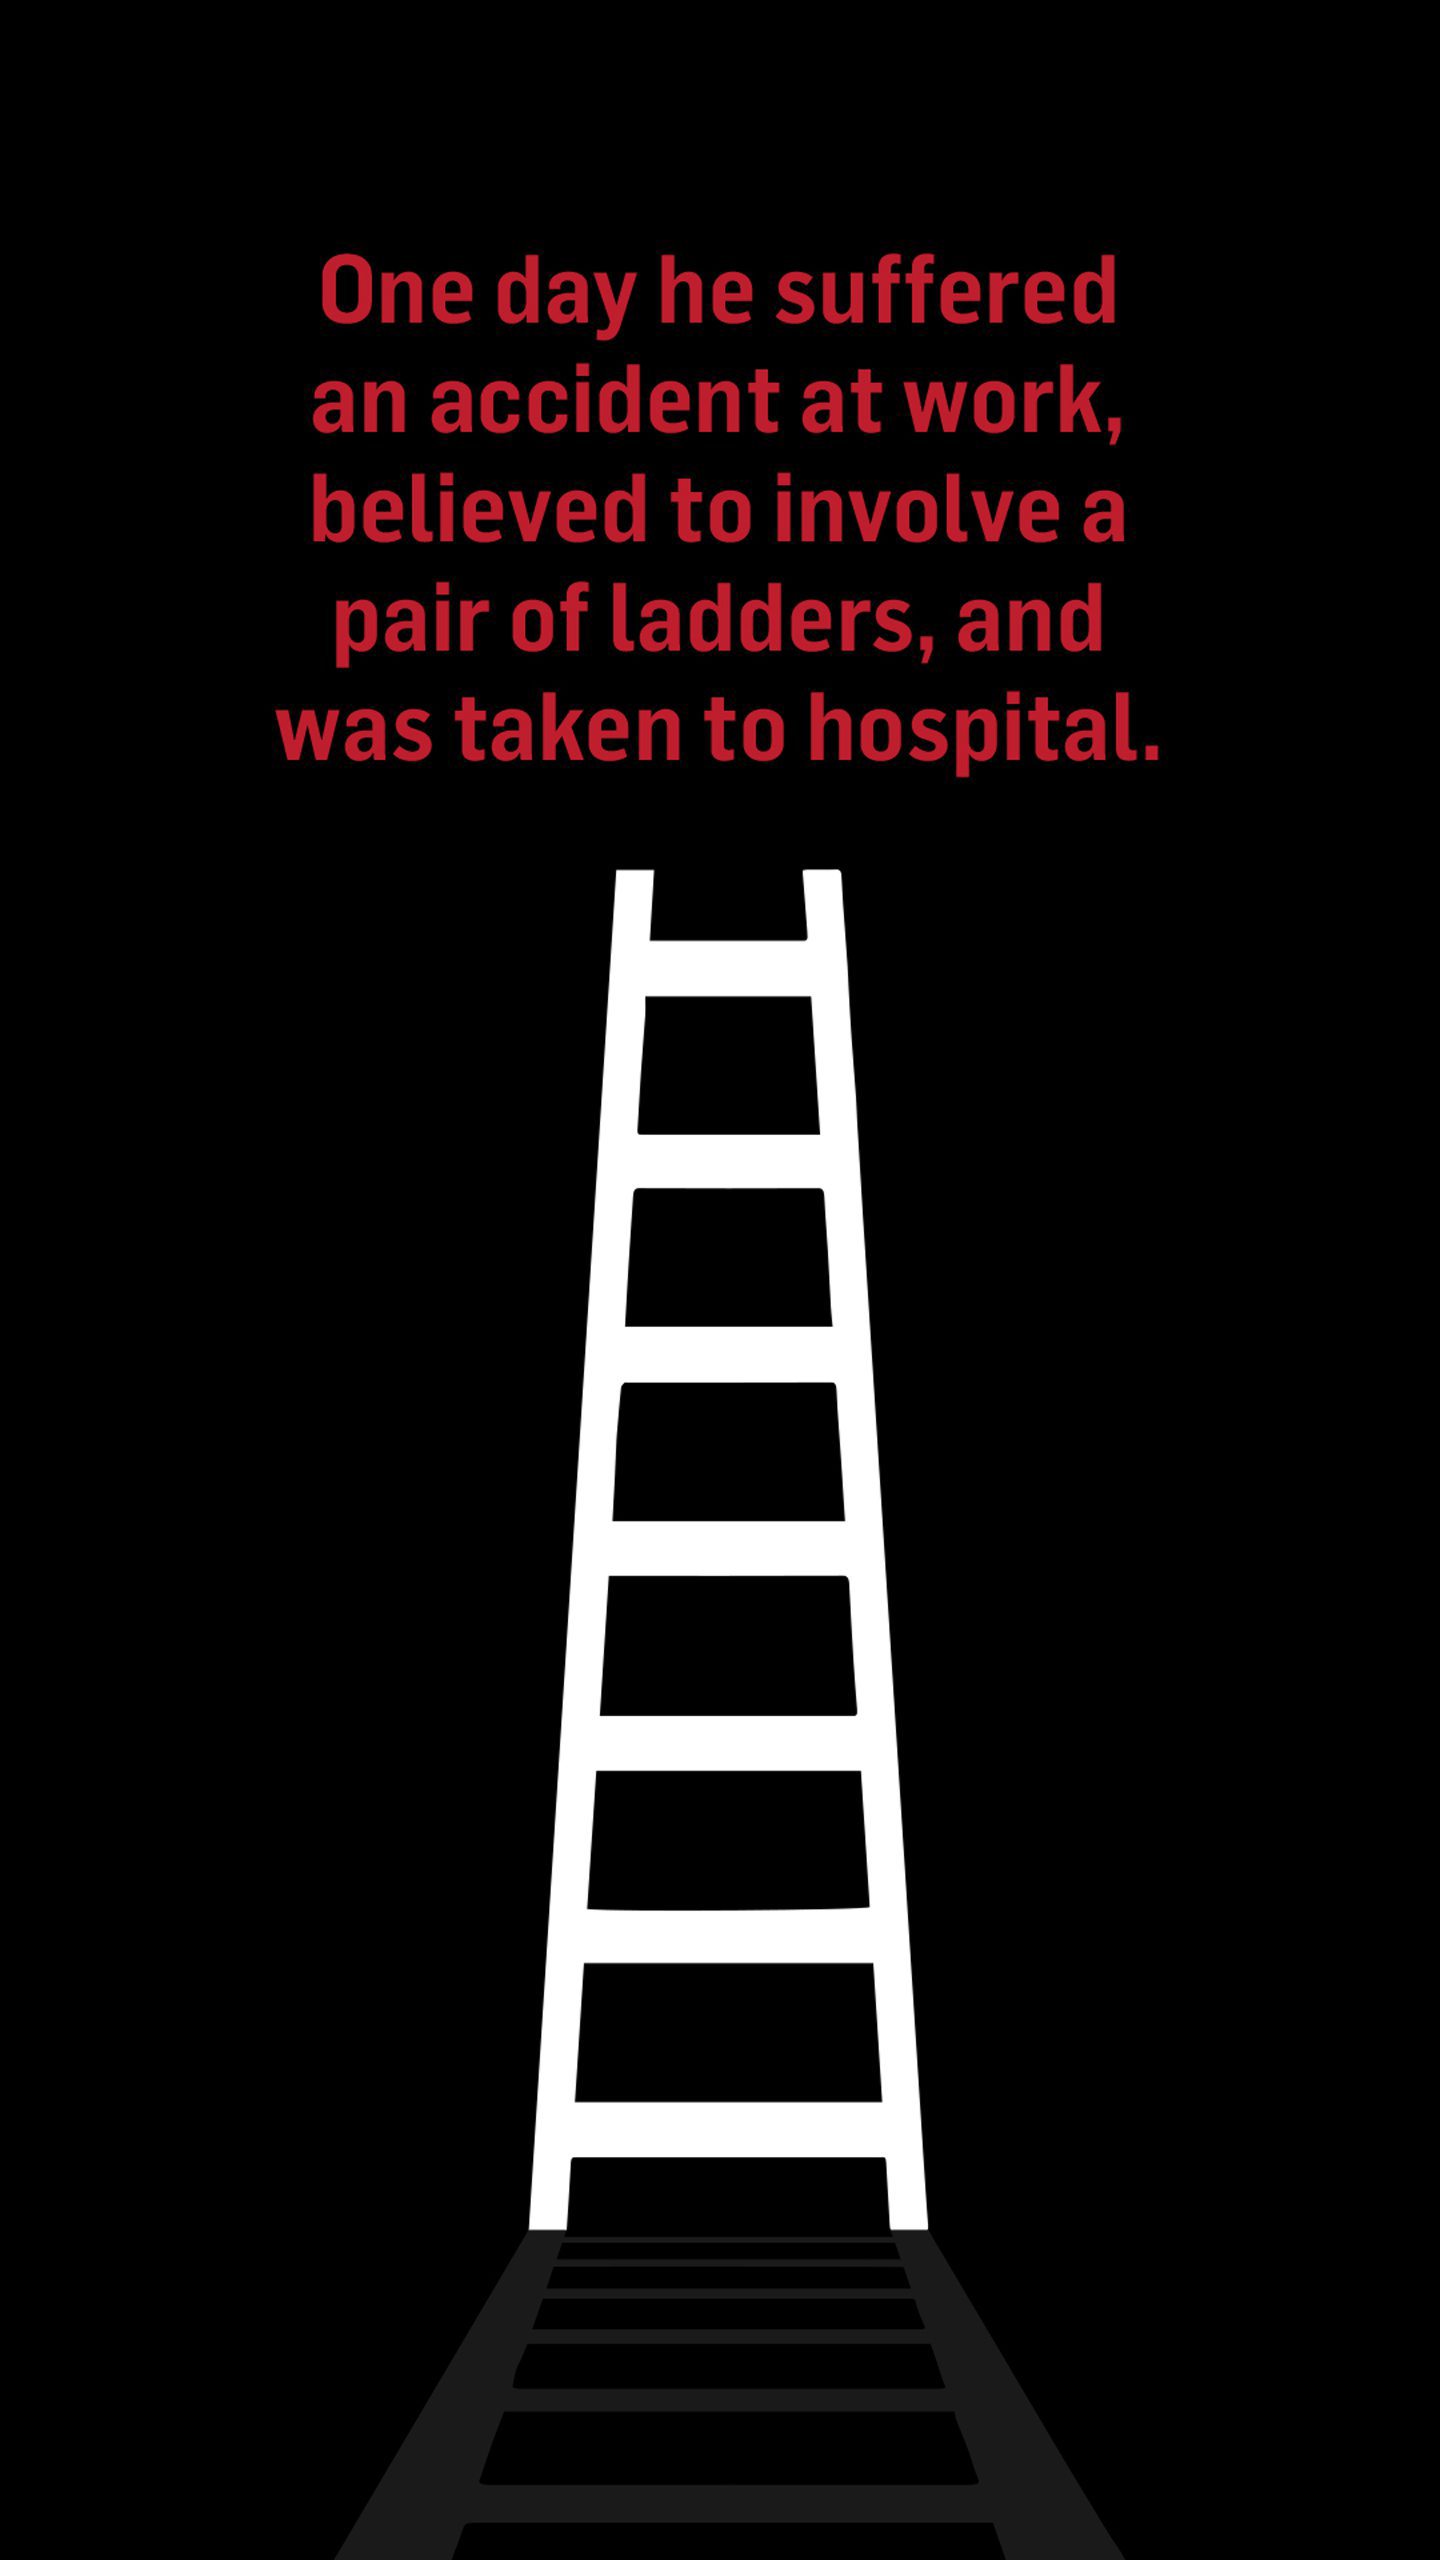 A pair of white ladders on a black background. The text above reads: One day he suffered an accident at work, believed to involve a pair of ladders, and was taken to hospital.